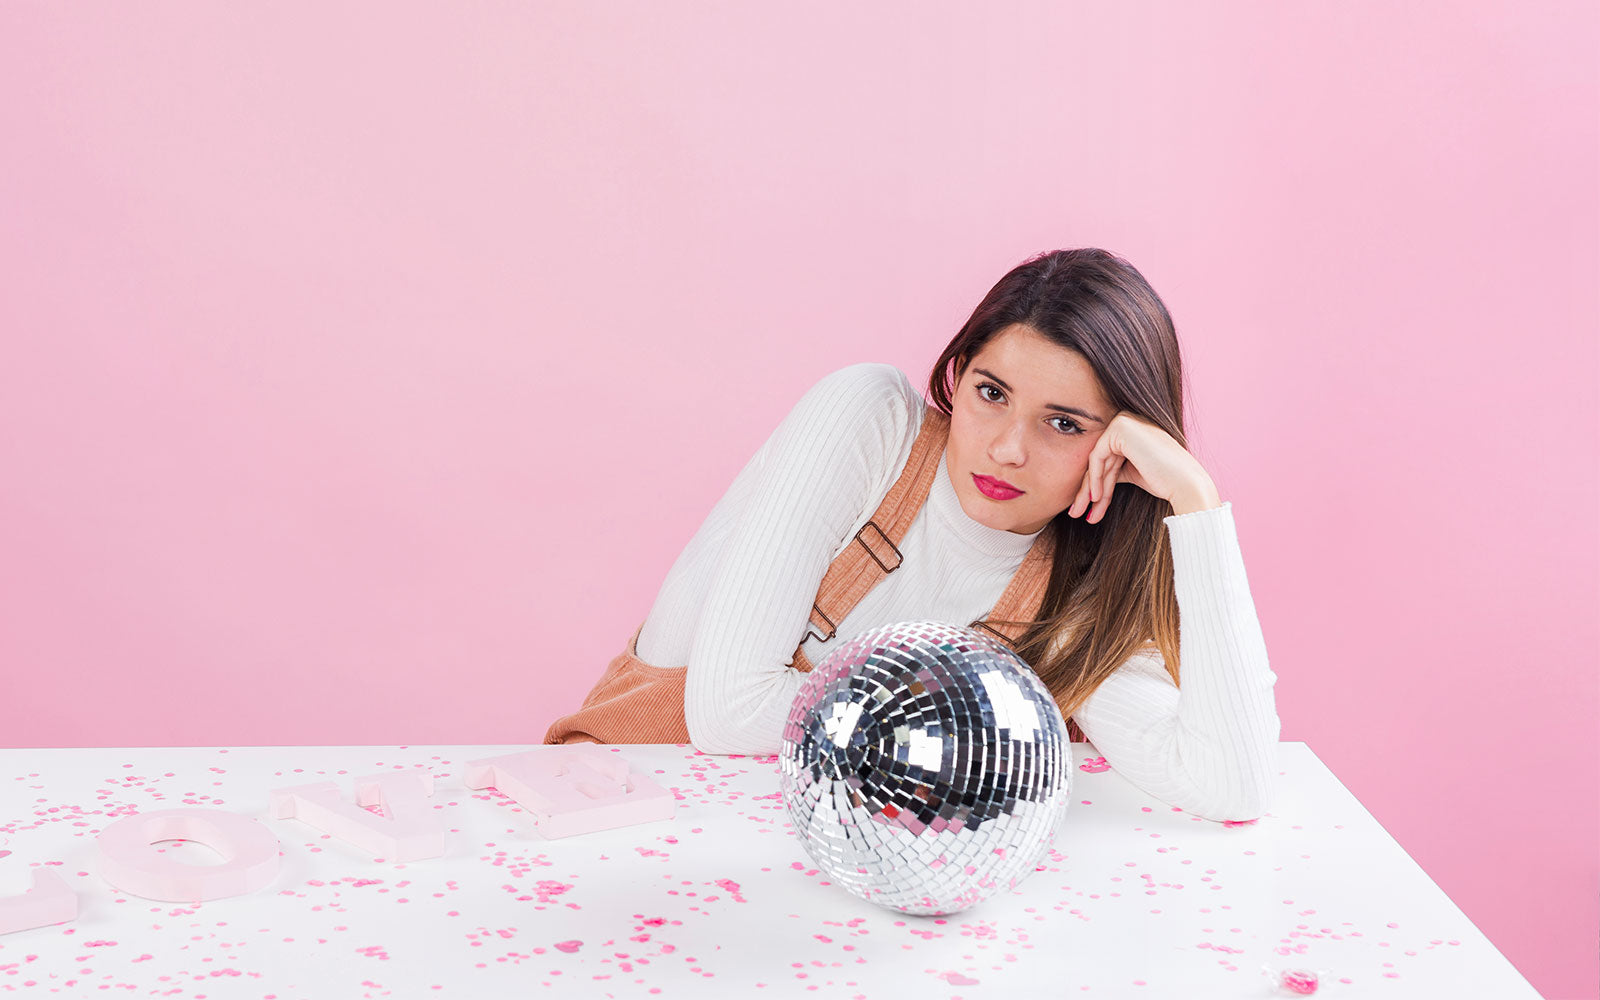 Image of a bored-looking woman leaning on a marble table top with a silver disco ball in front of her. Set against a pink wall.